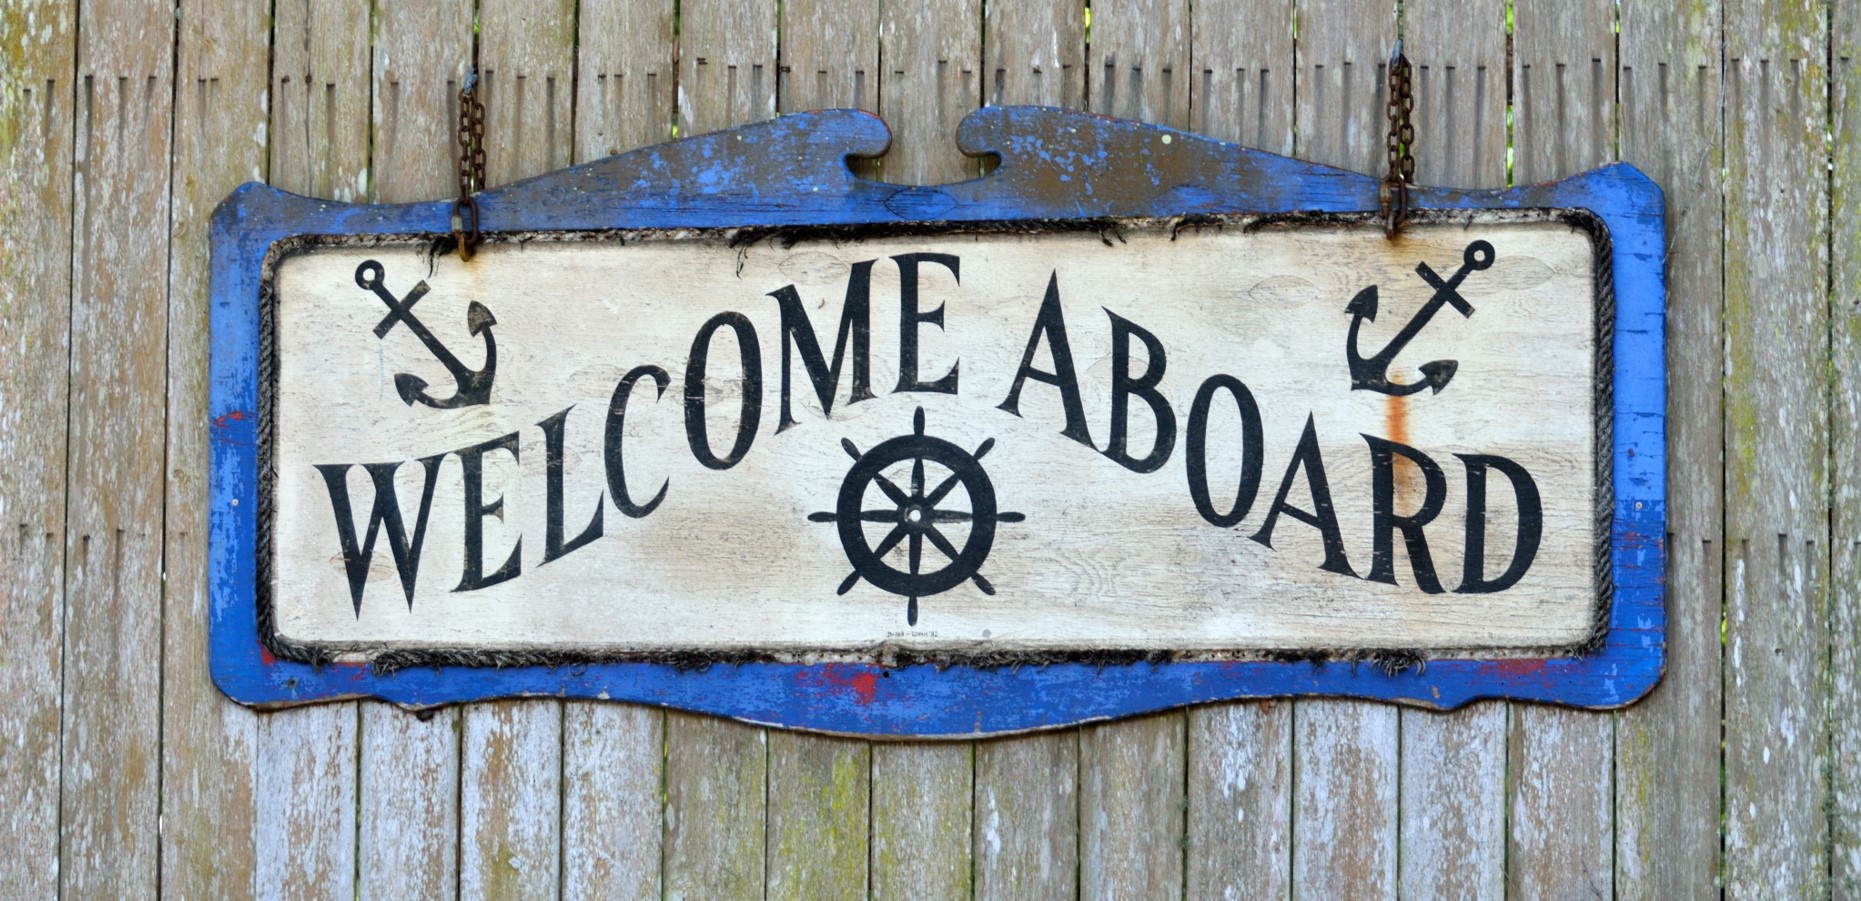 nautical sign with words "welcome aboard"